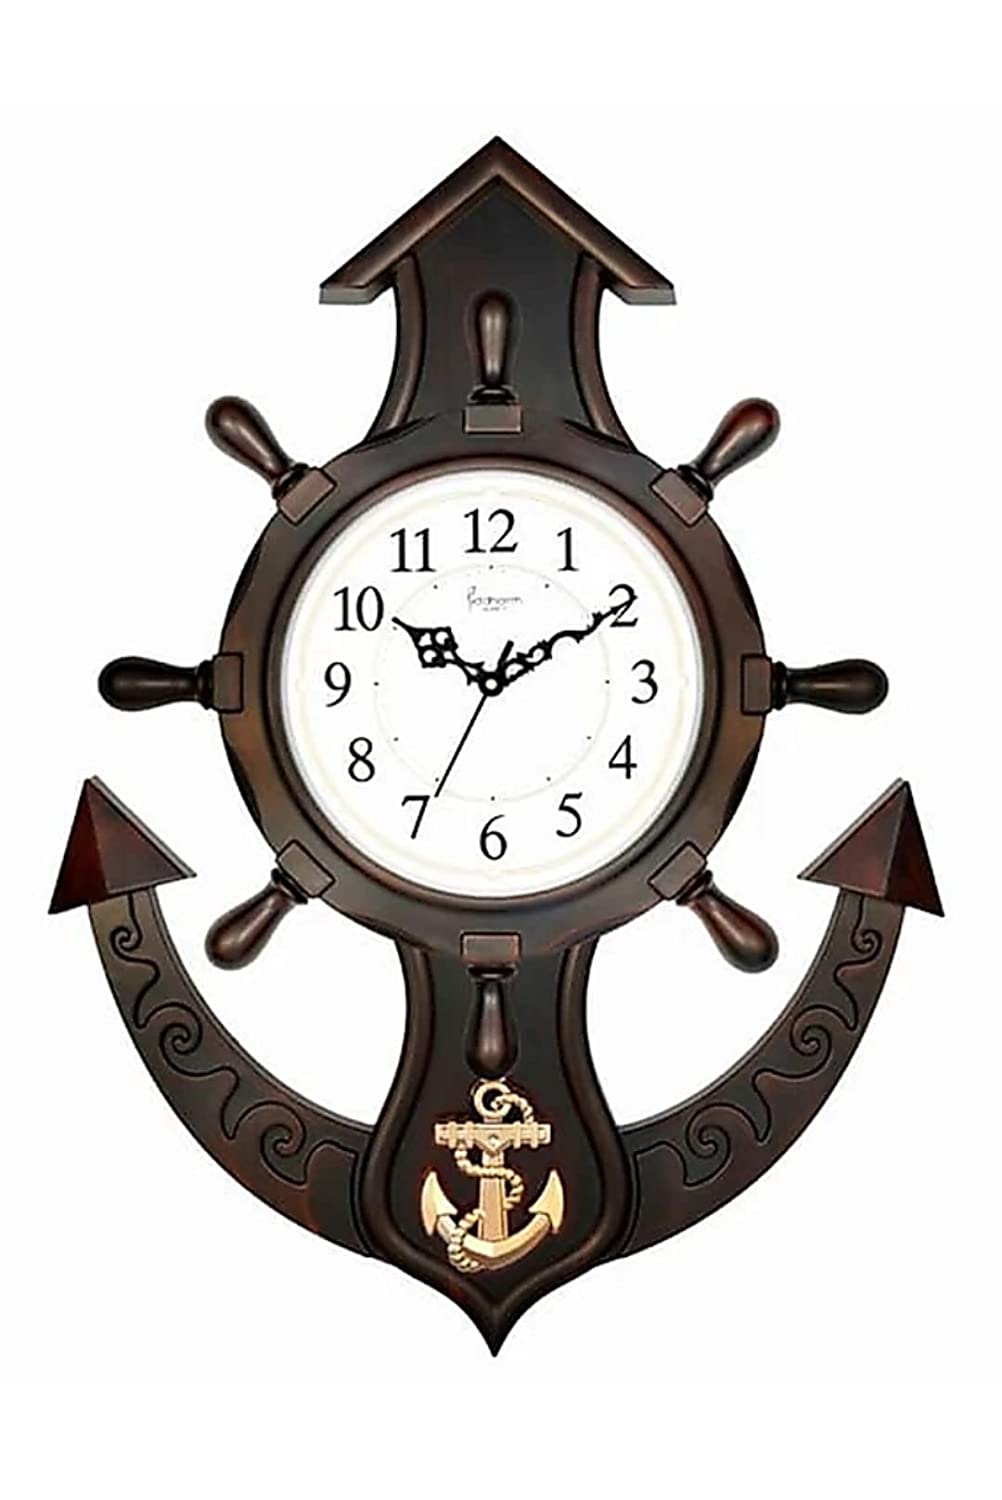 FunkyTradition Antique Anchor Rose Wood Color Wall Clock for Home Office Decor and Gifts 70 CM Tall